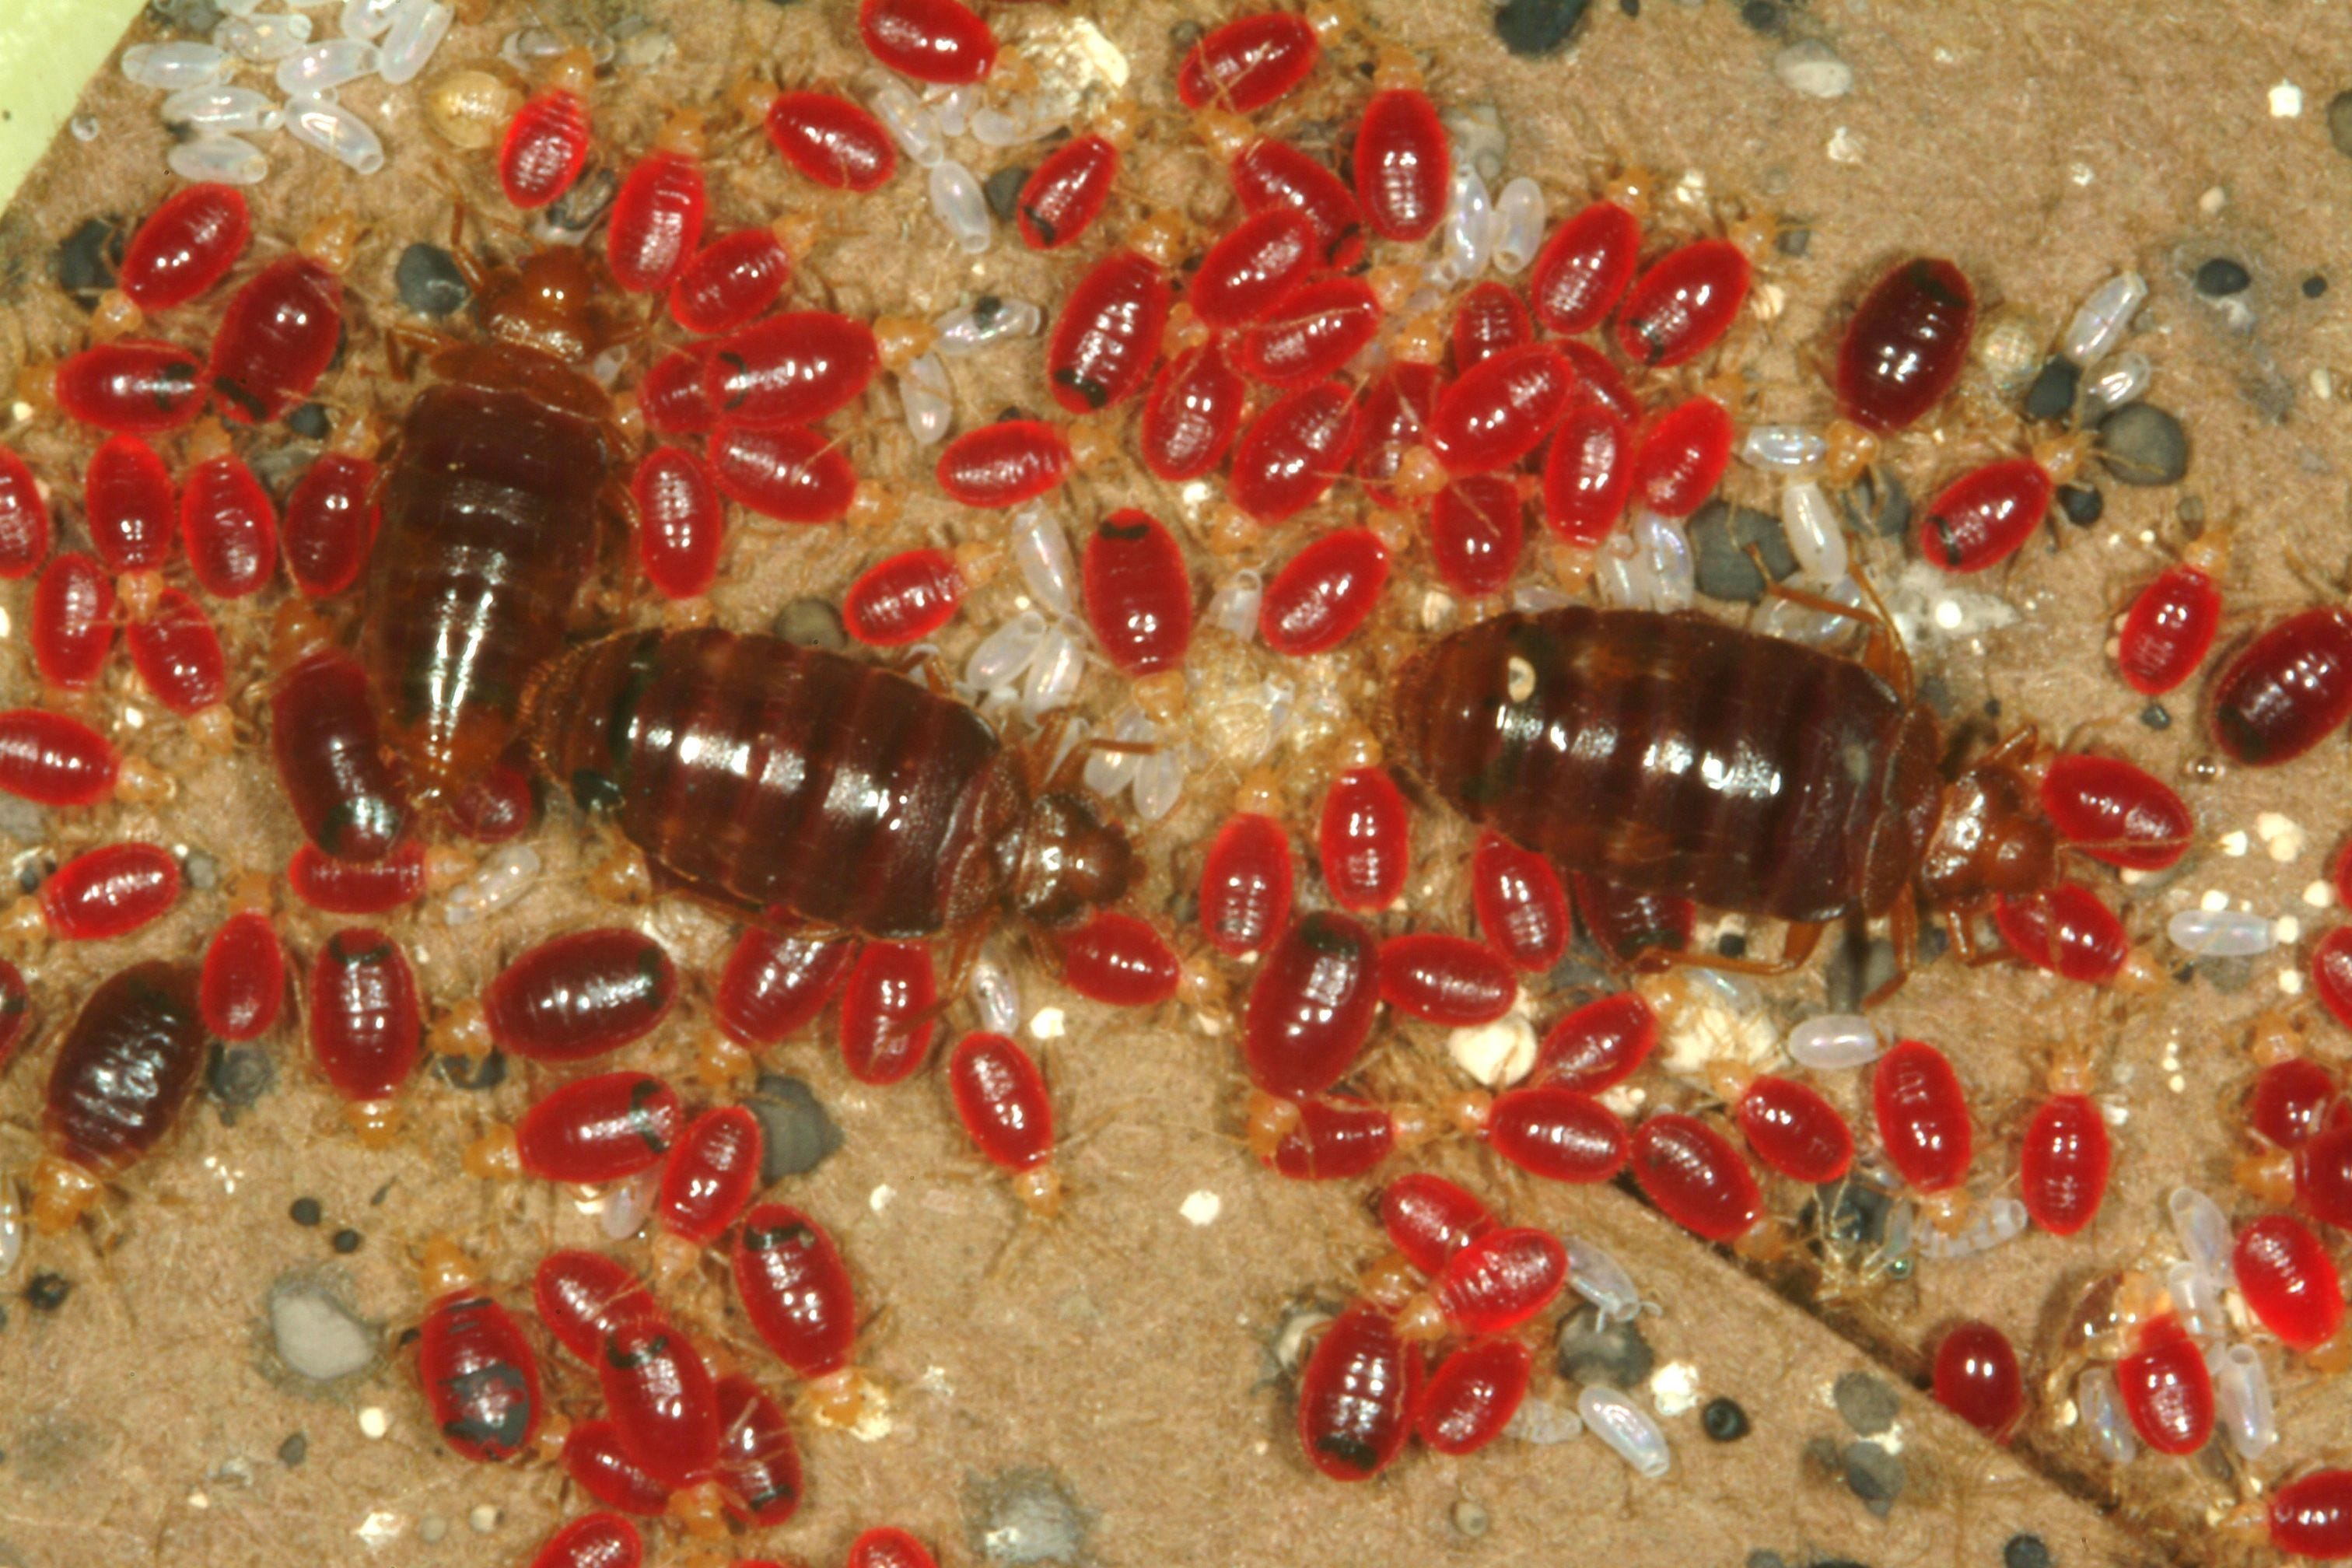 Bed bugs disappeared for 40 years, now they're back with a vengeance. Here's what to know